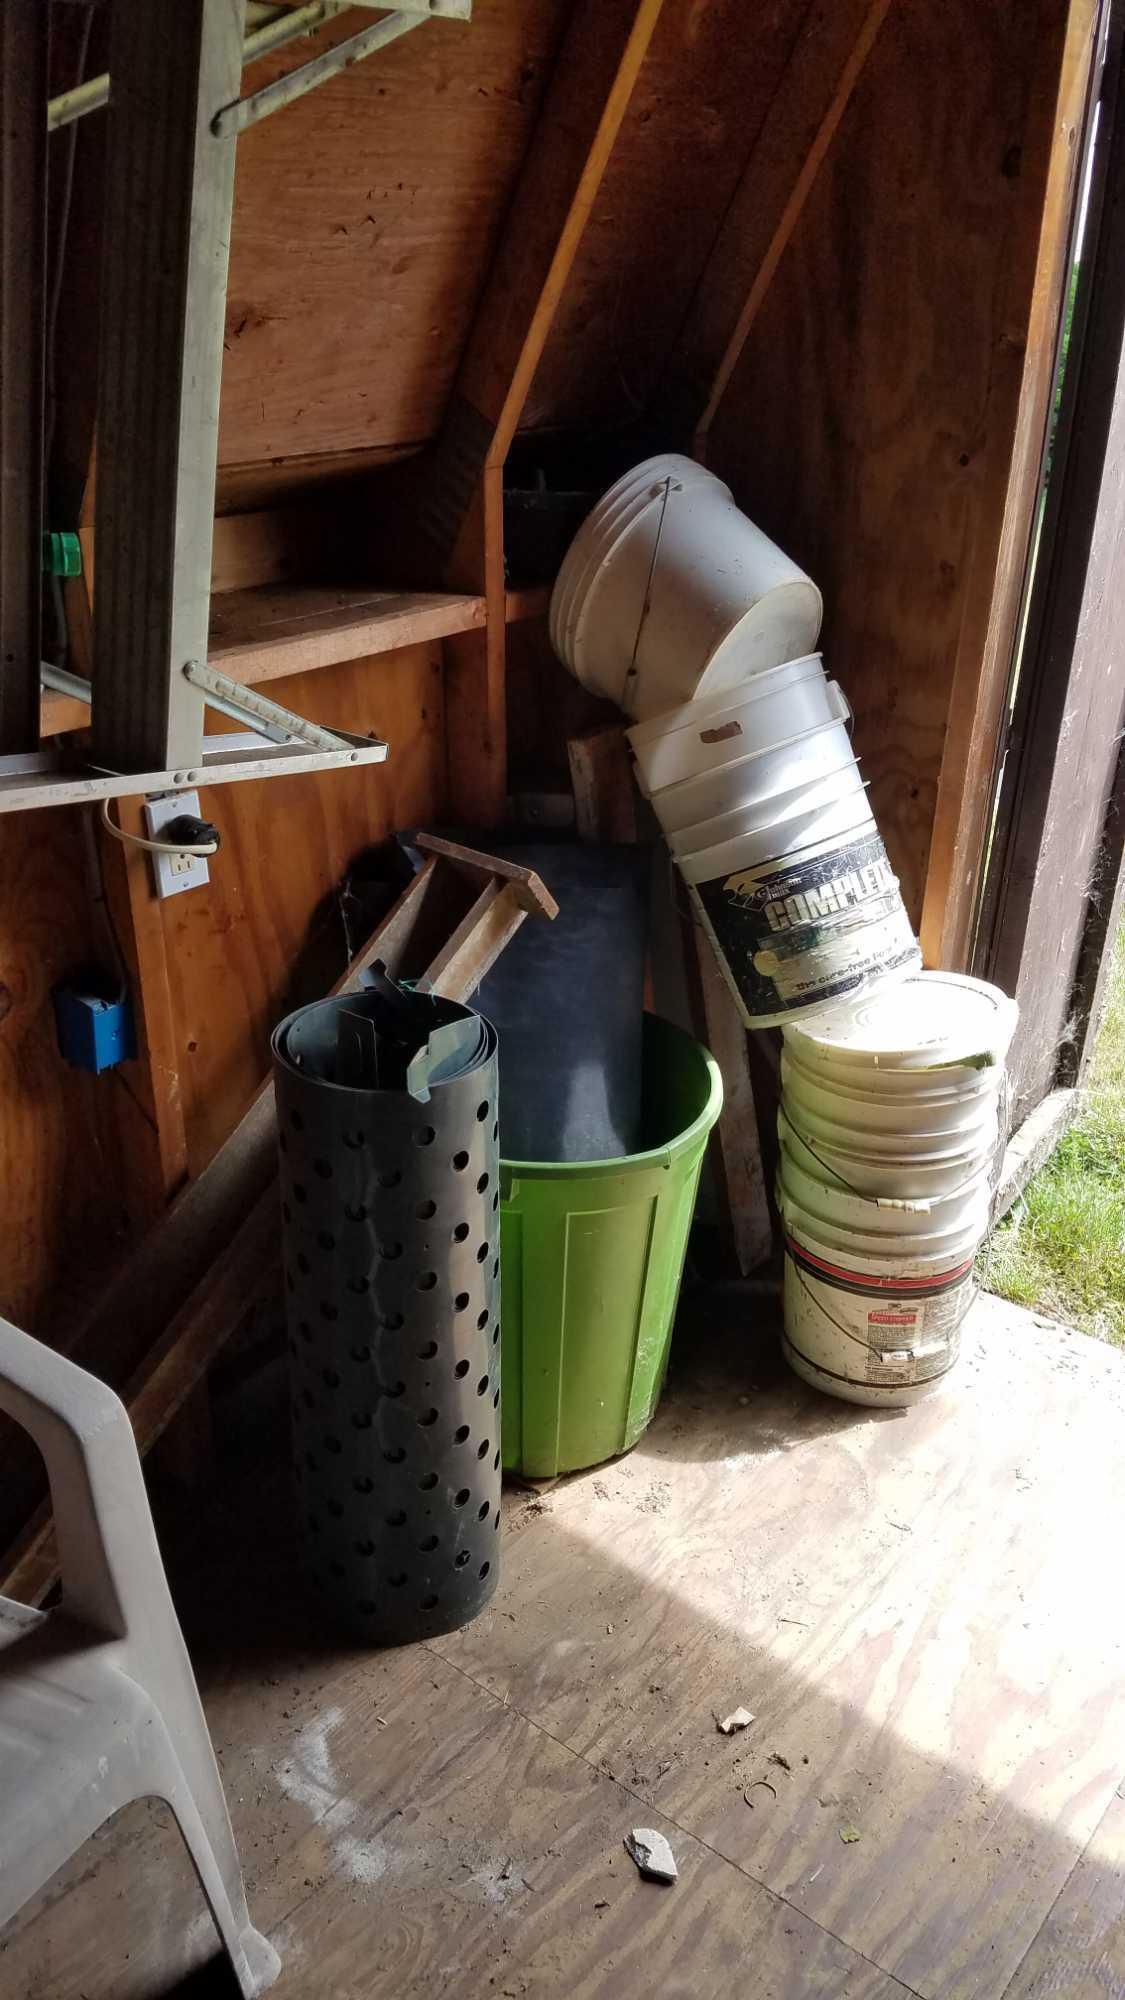 Contents of shed, sealtest milk box, alum stepladder, yard tools, plastic chairs, snowman, garden